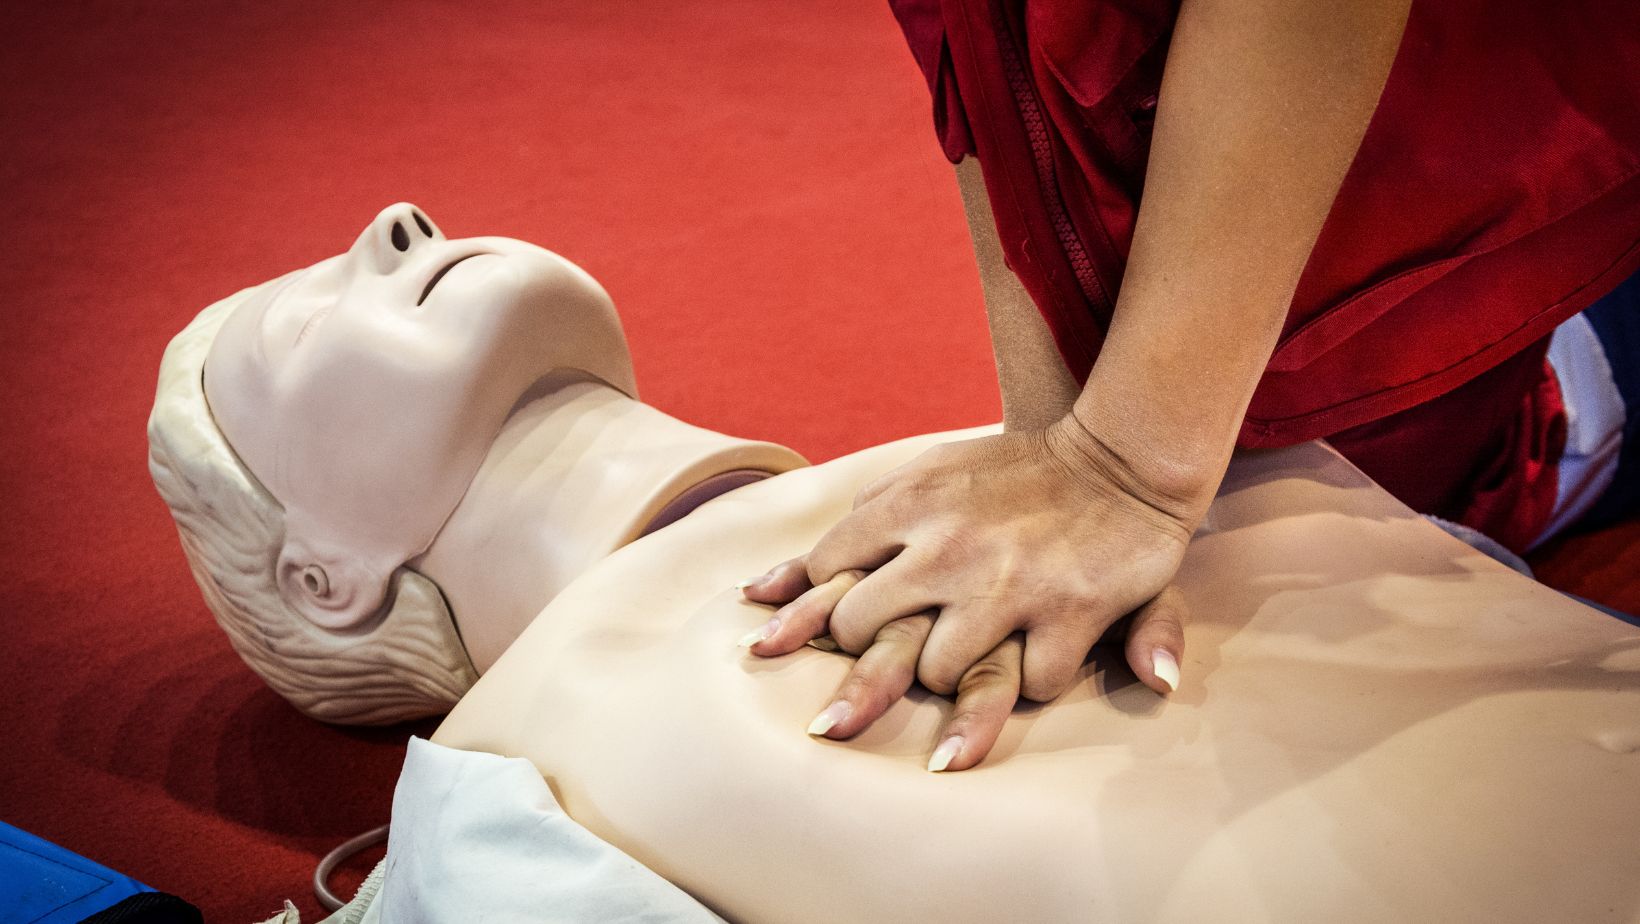 to ensure high-quality cpr and high-quality chest compressions, you should